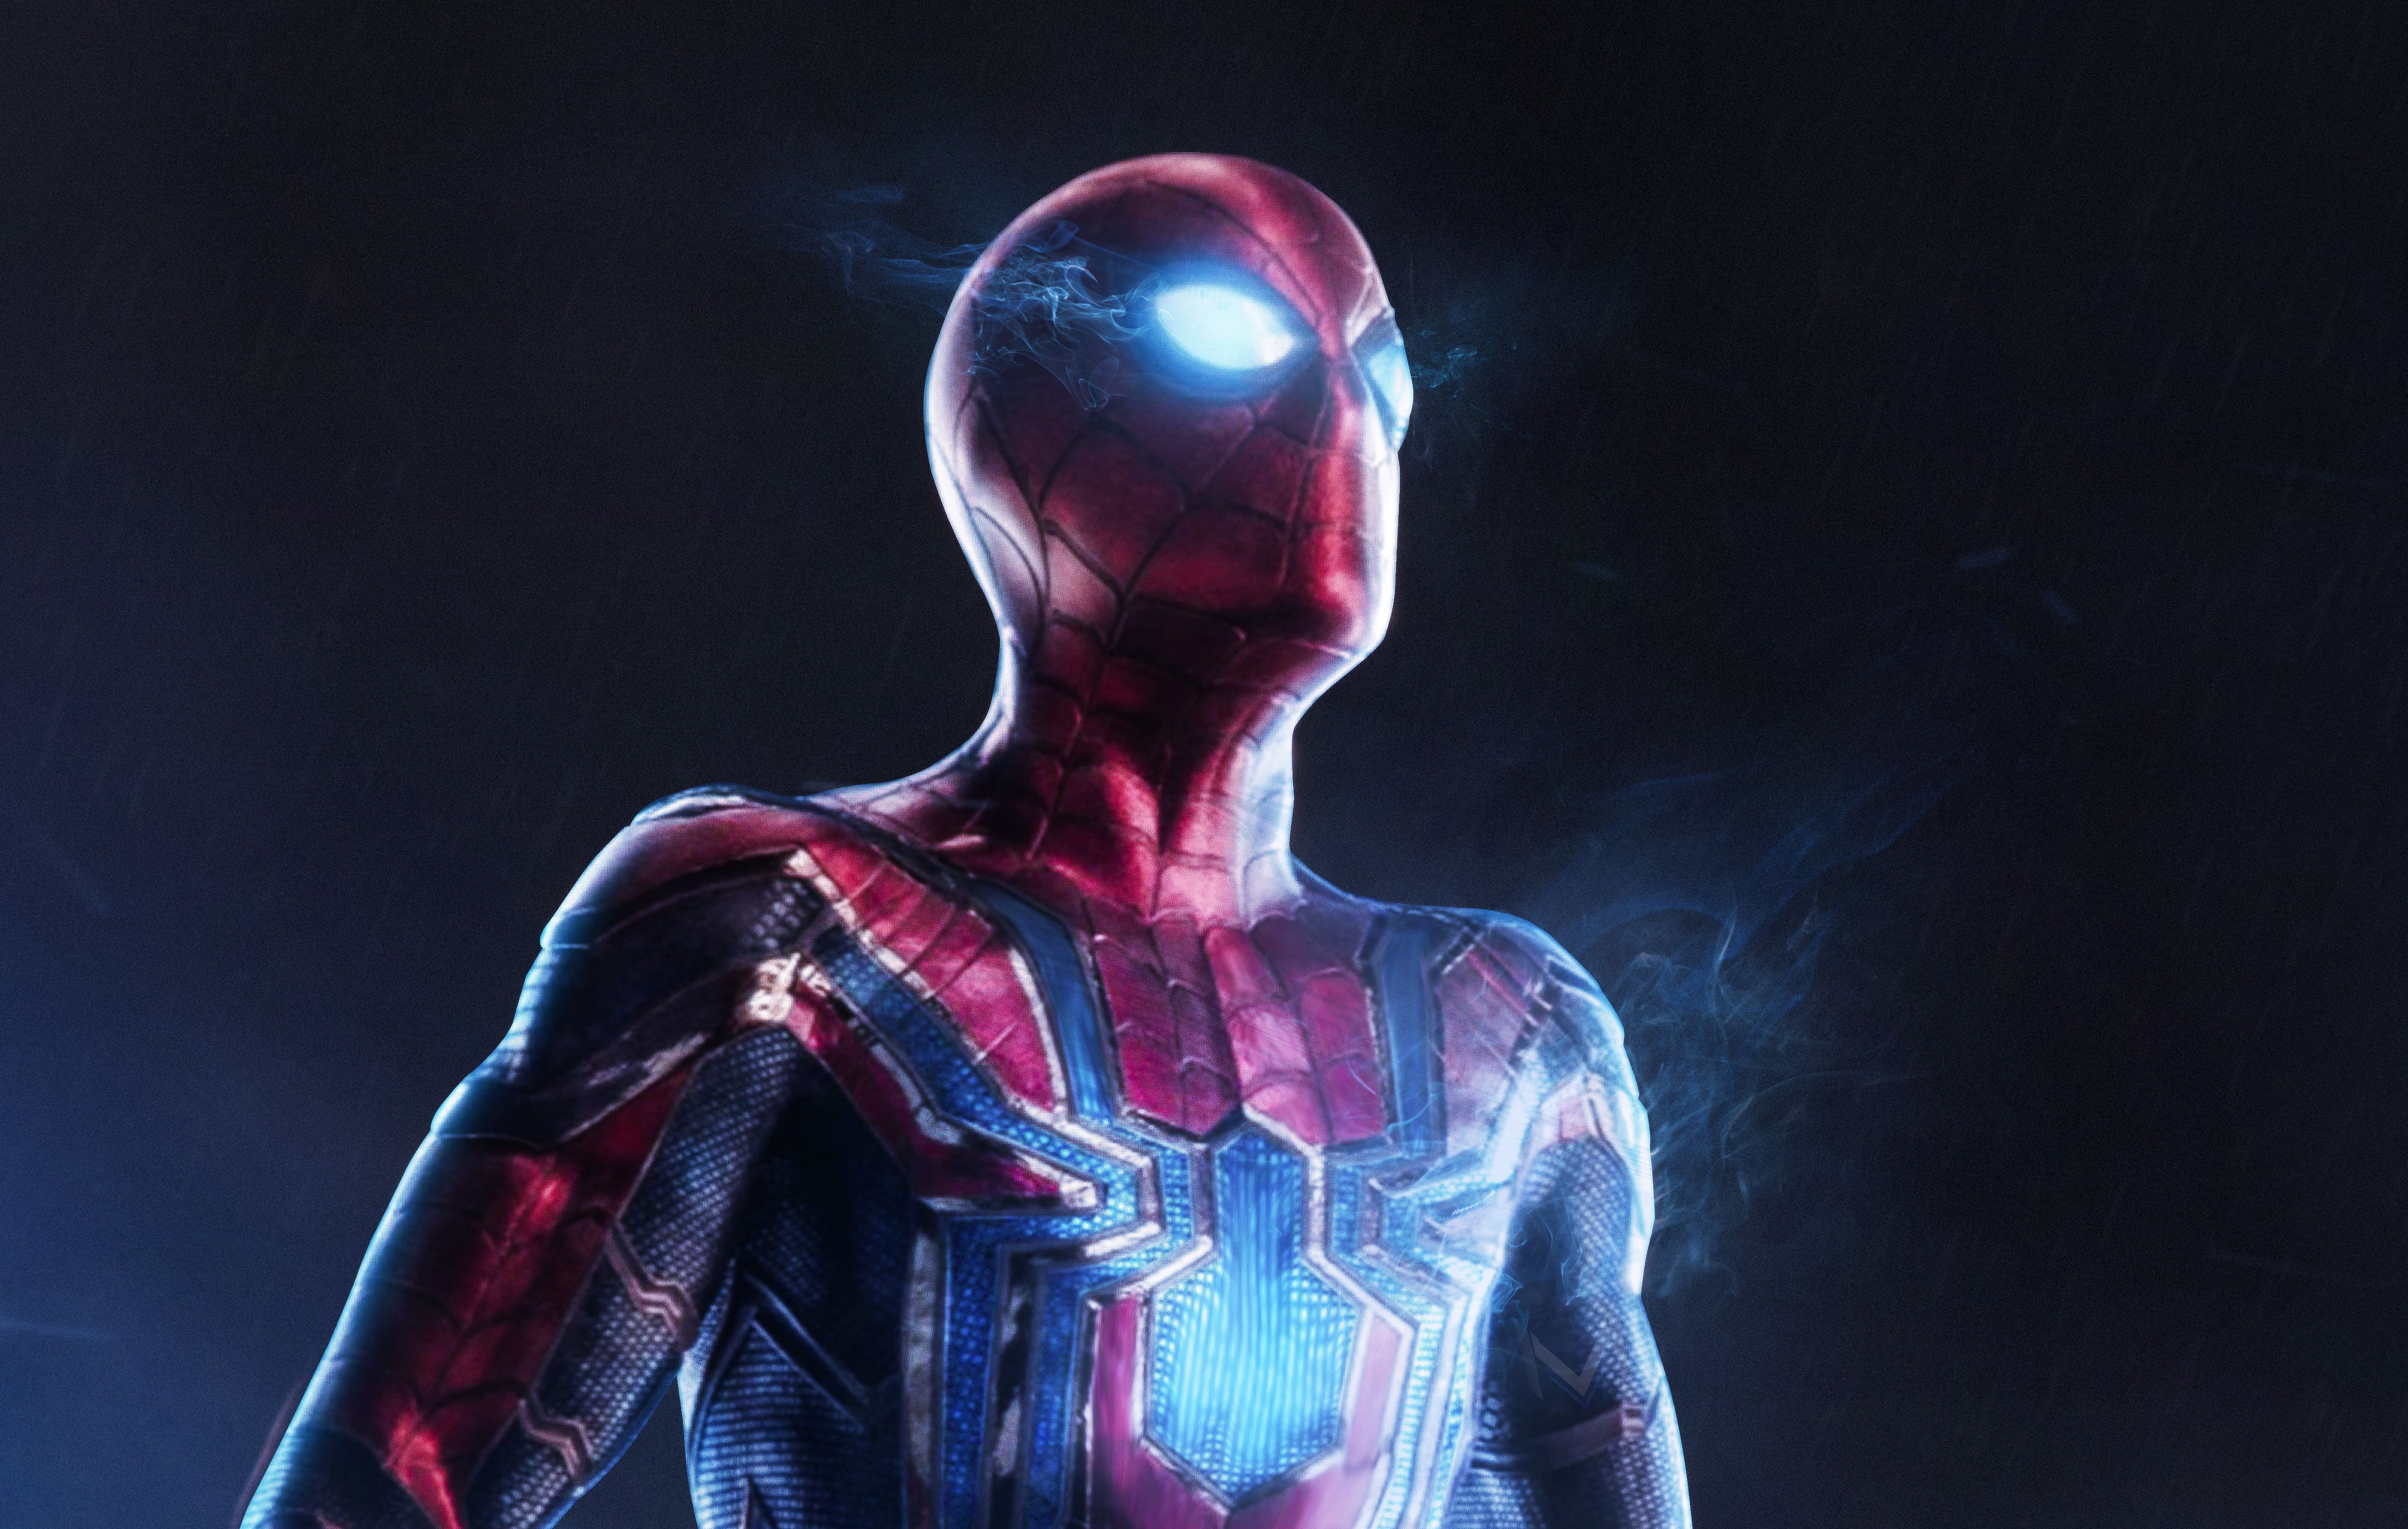 Iron Spider 4k Ultra HD Wallpapers.